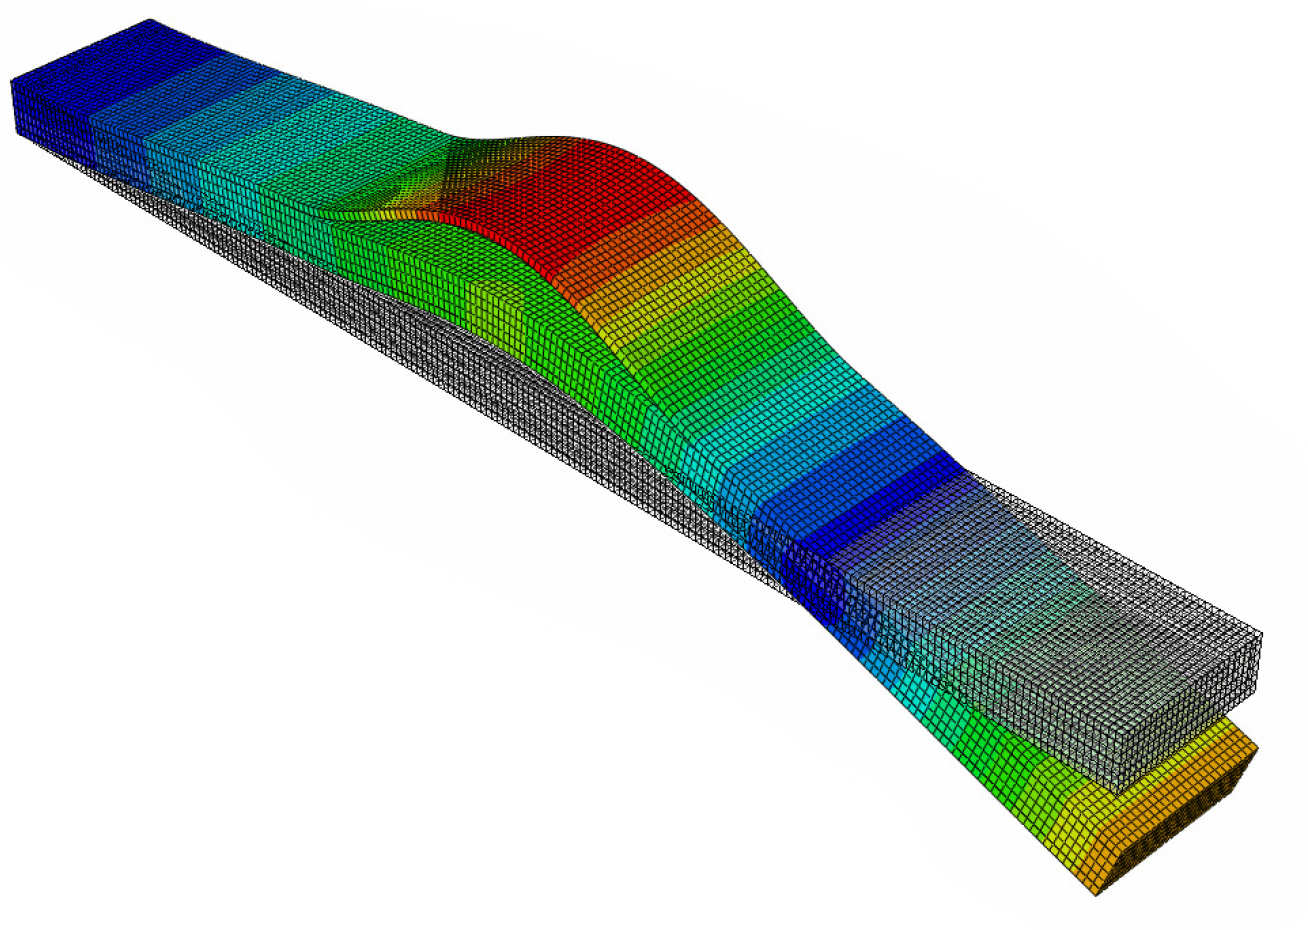 One of the mode shapes of debonded sandwich structure from modelling